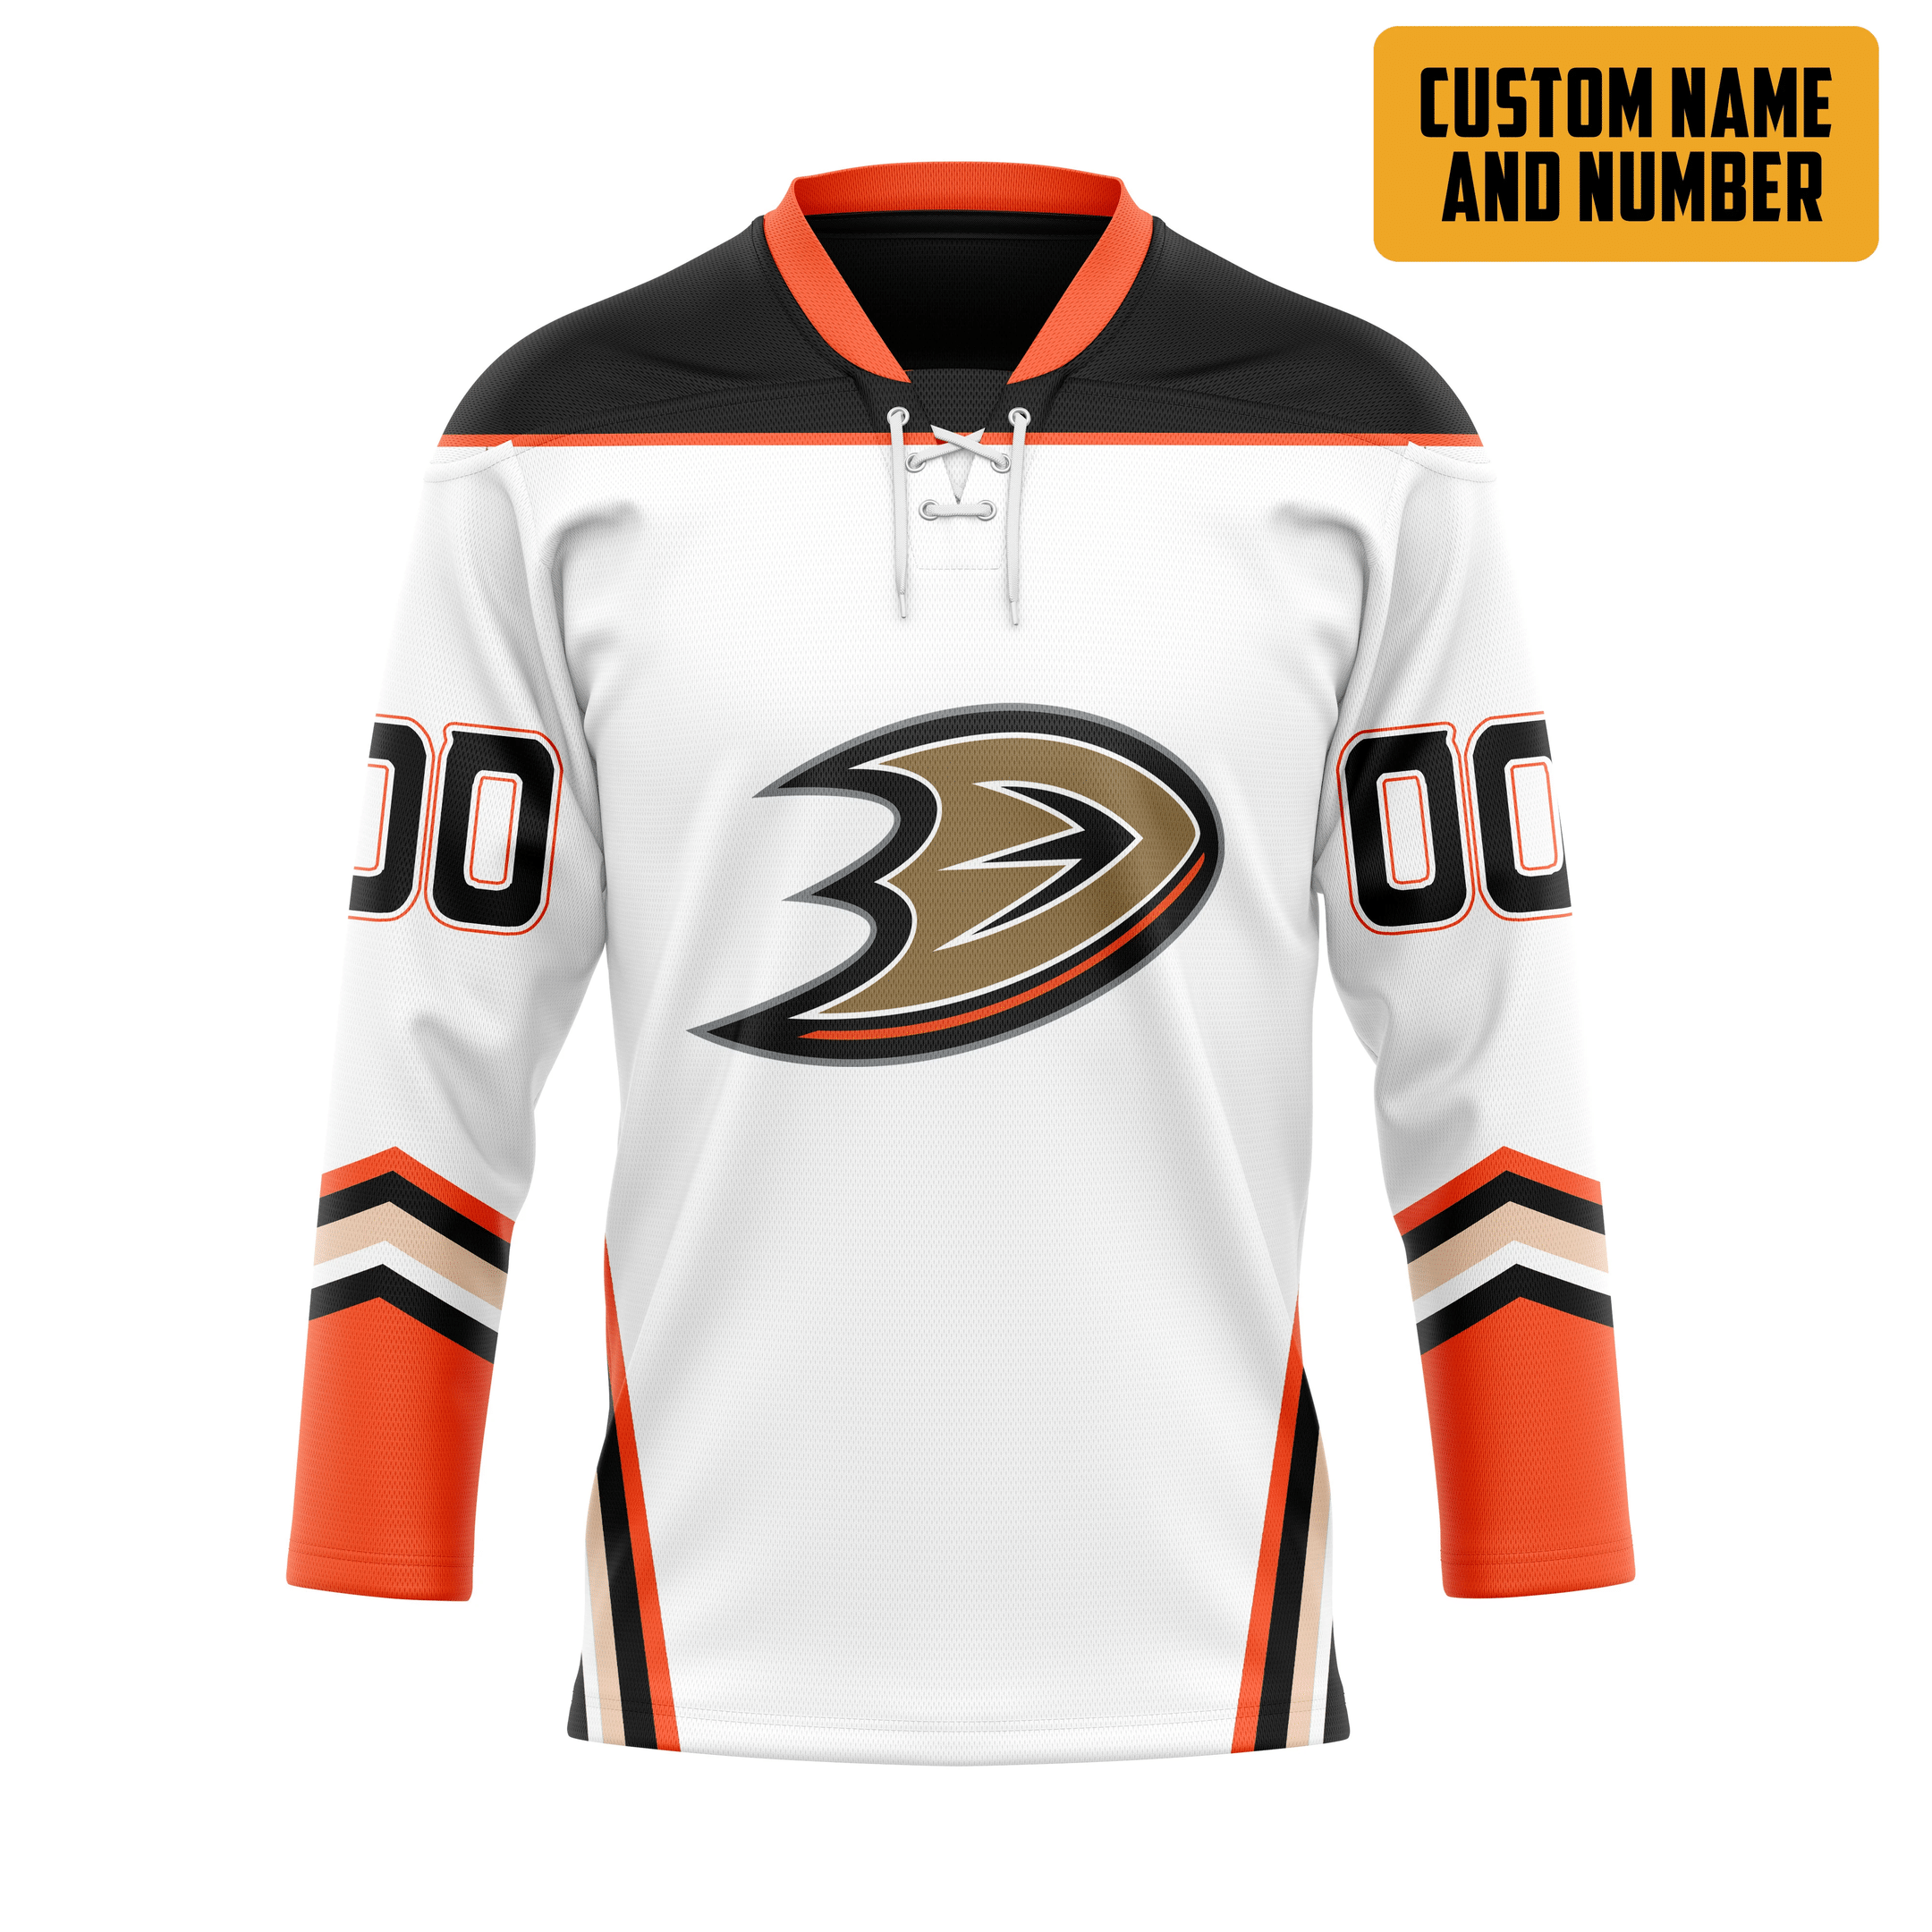 Choosing a hockey jersey is not as difficult as you think. 80